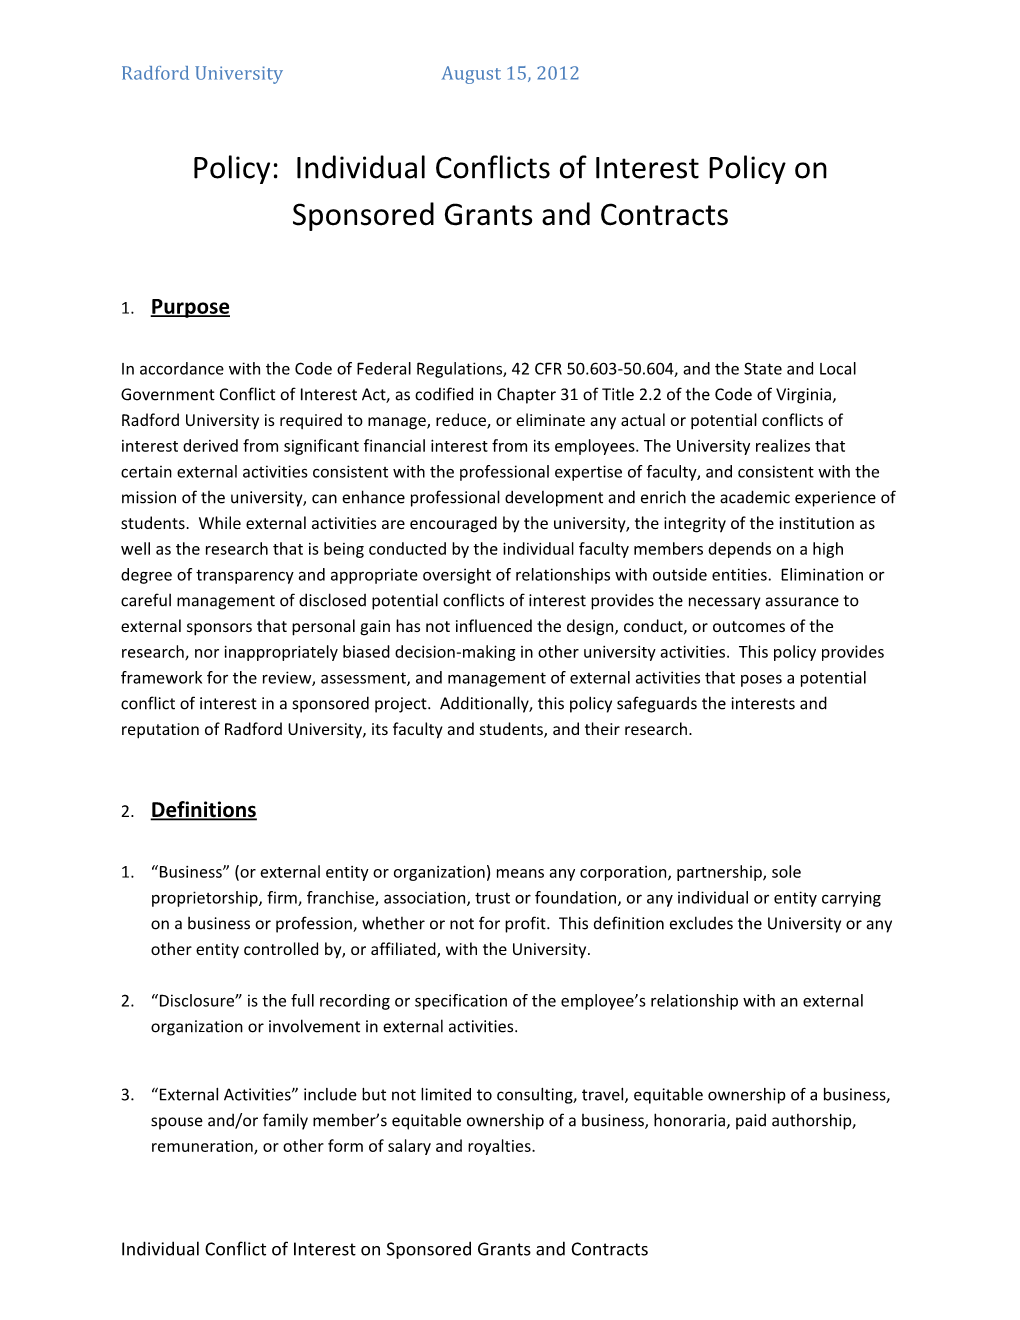 Policy: Individual Conflicts of Interest Policy on Sponsored Grants and Contracts